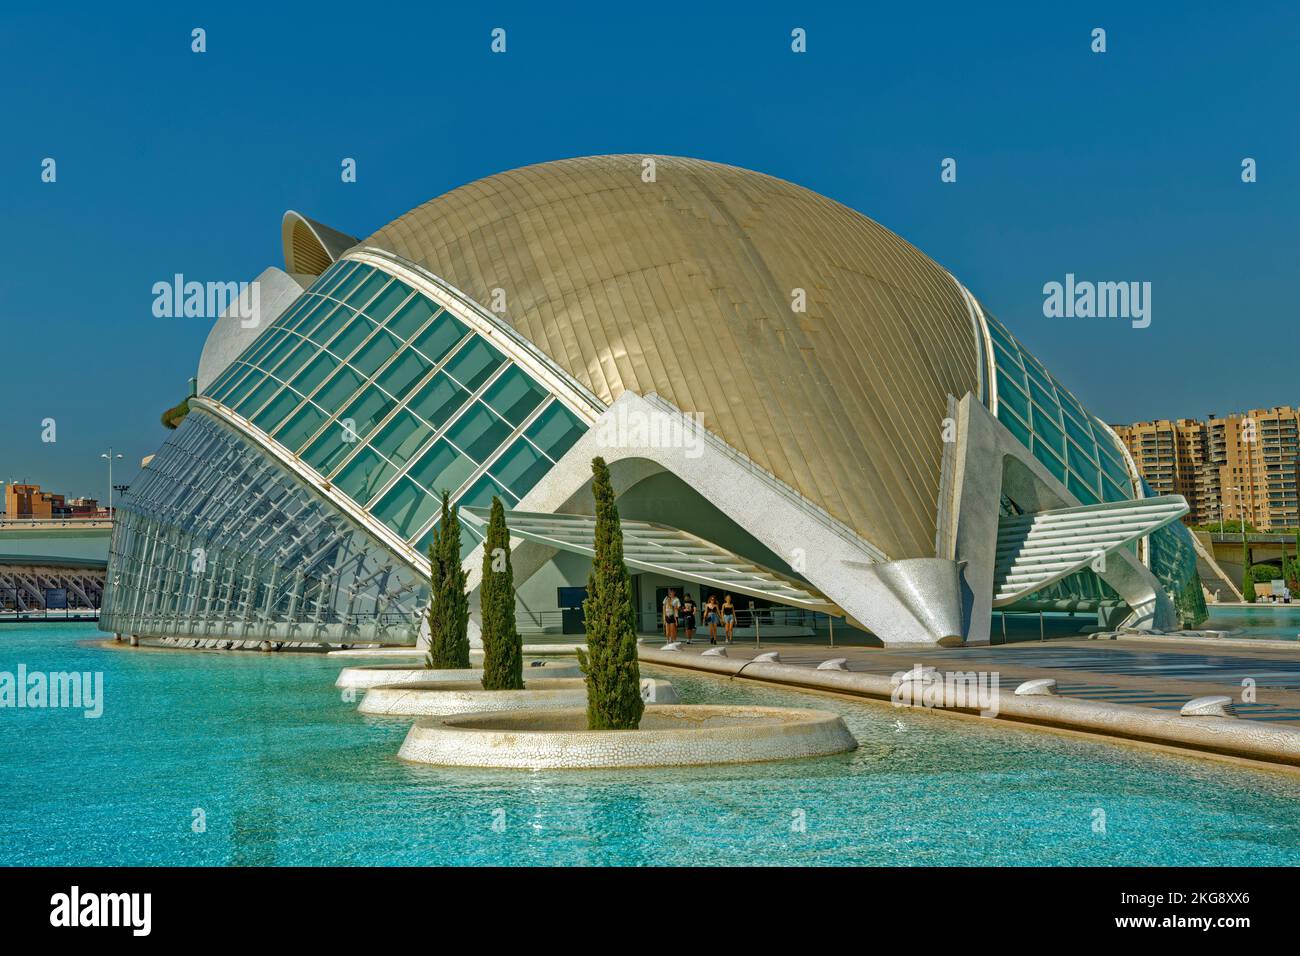 The Hemisferic building in the Arts and Science park at Valencia, Valencia Province, Spain. Stock Photo